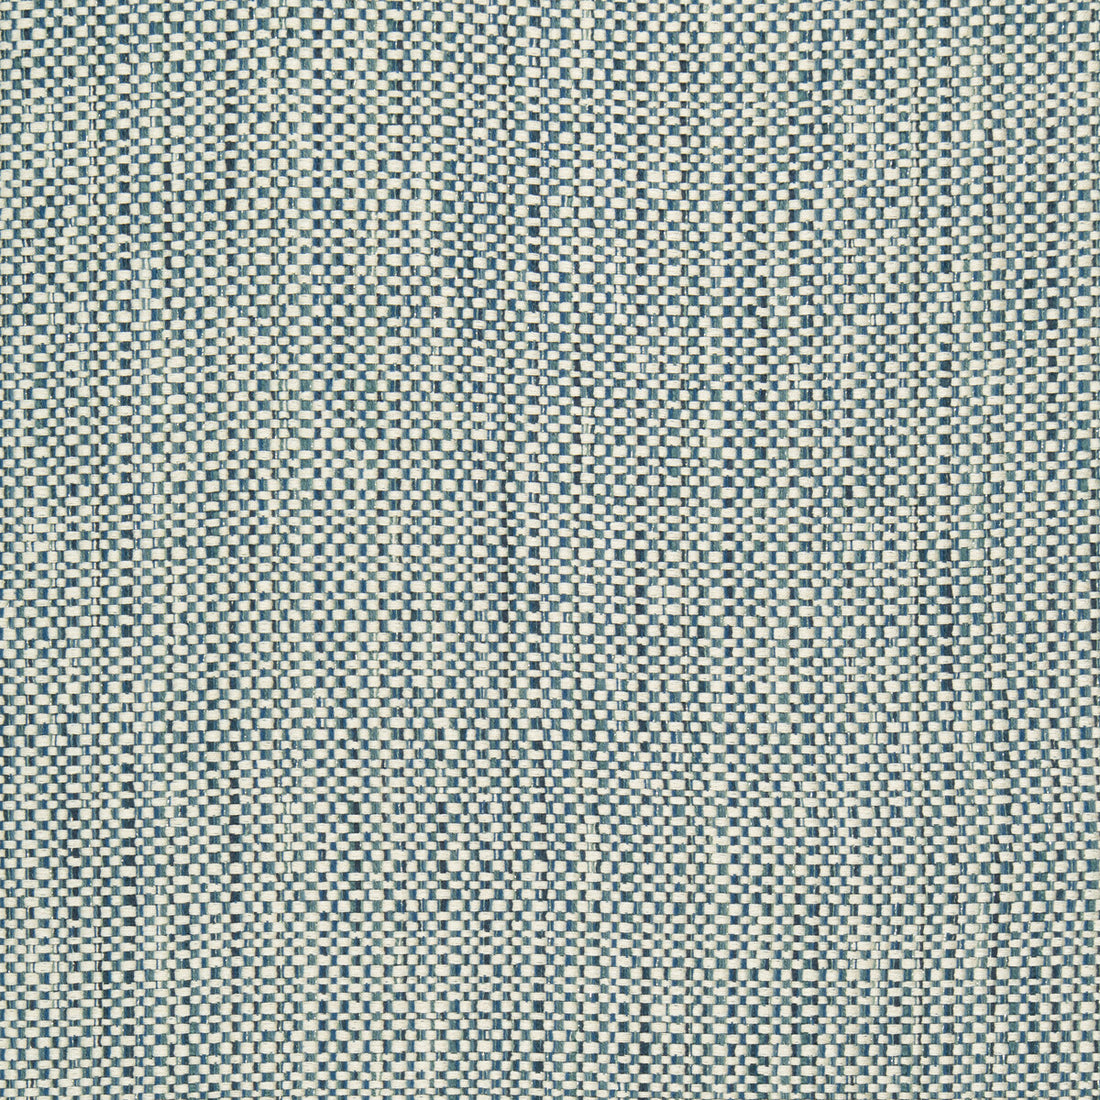 Kravet Design fabric in 34683-5 color - pattern 34683.5.0 - by Kravet Design in the Performance Crypton Home collection